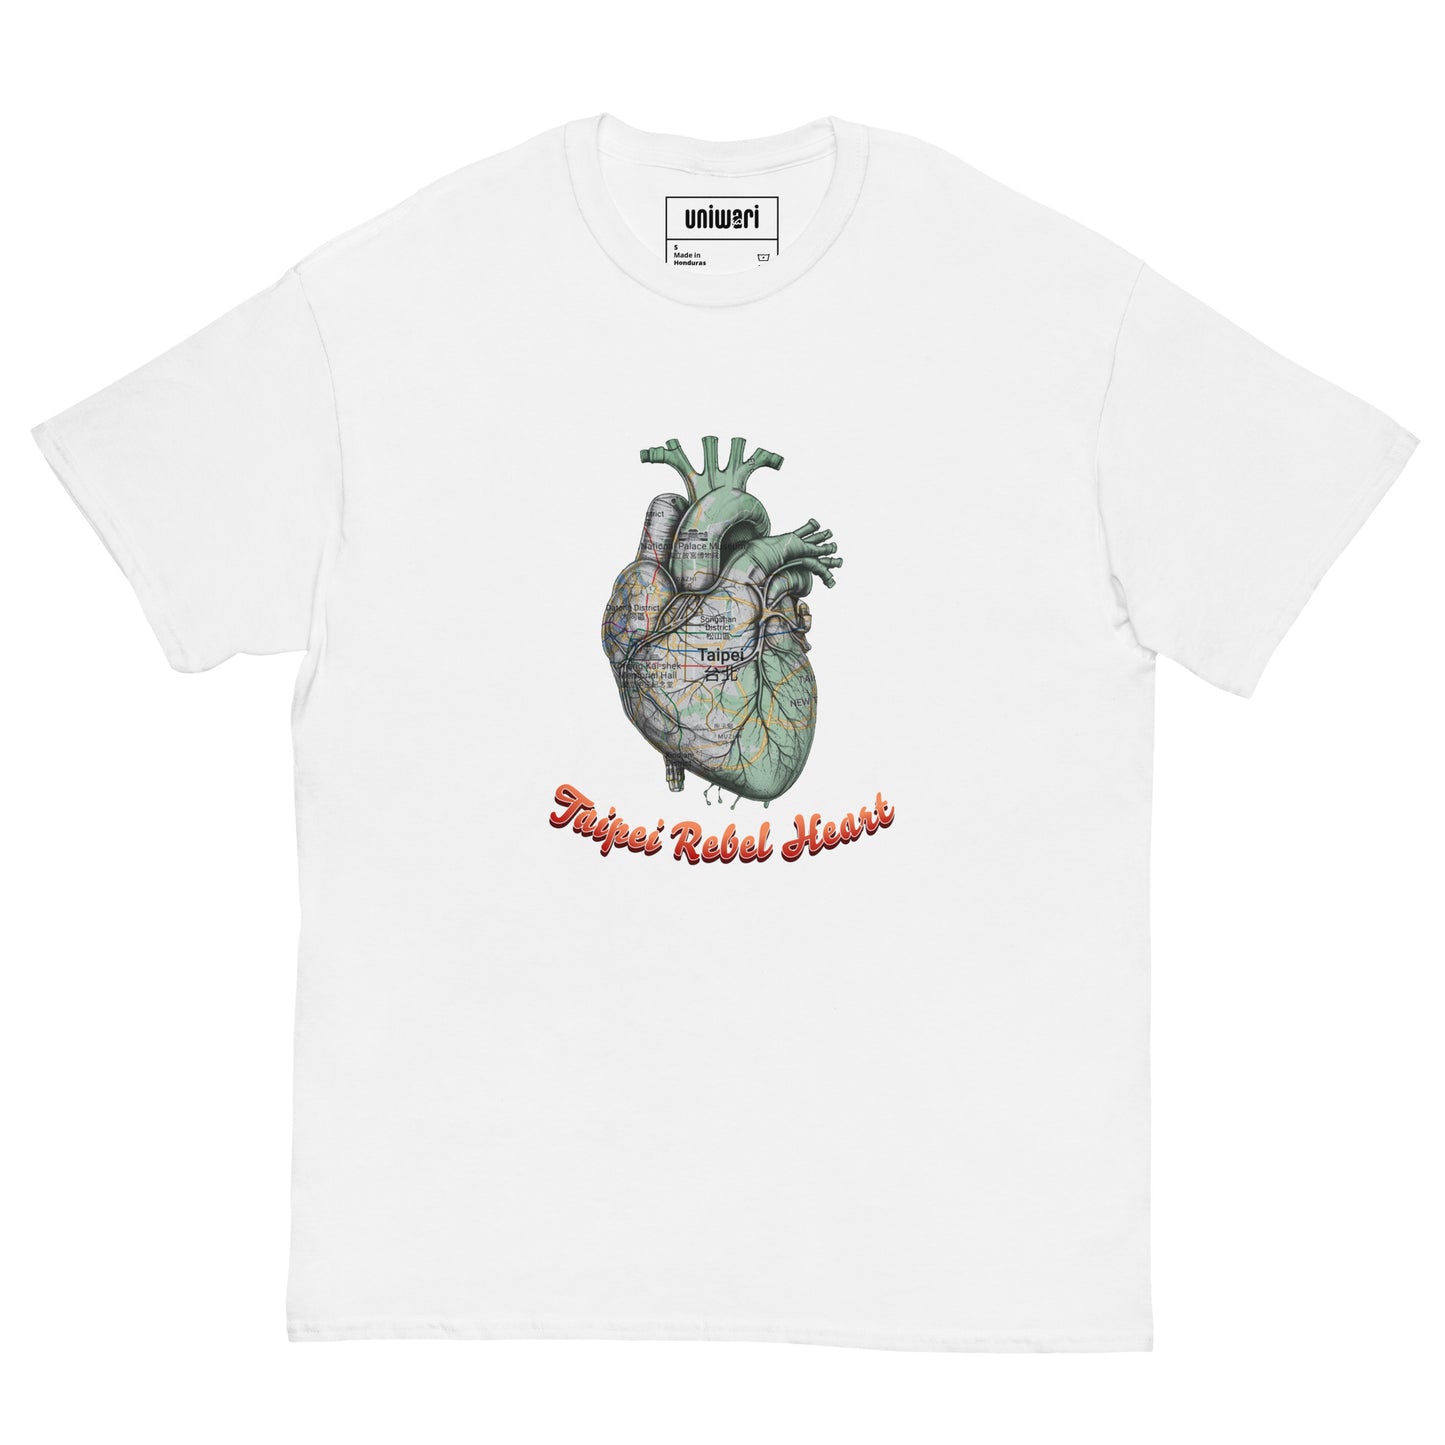 White High Quality Tee - Front Design with a Heart Shaped Map of Taipei and a Phrase "Taipei Rebel Heart" print